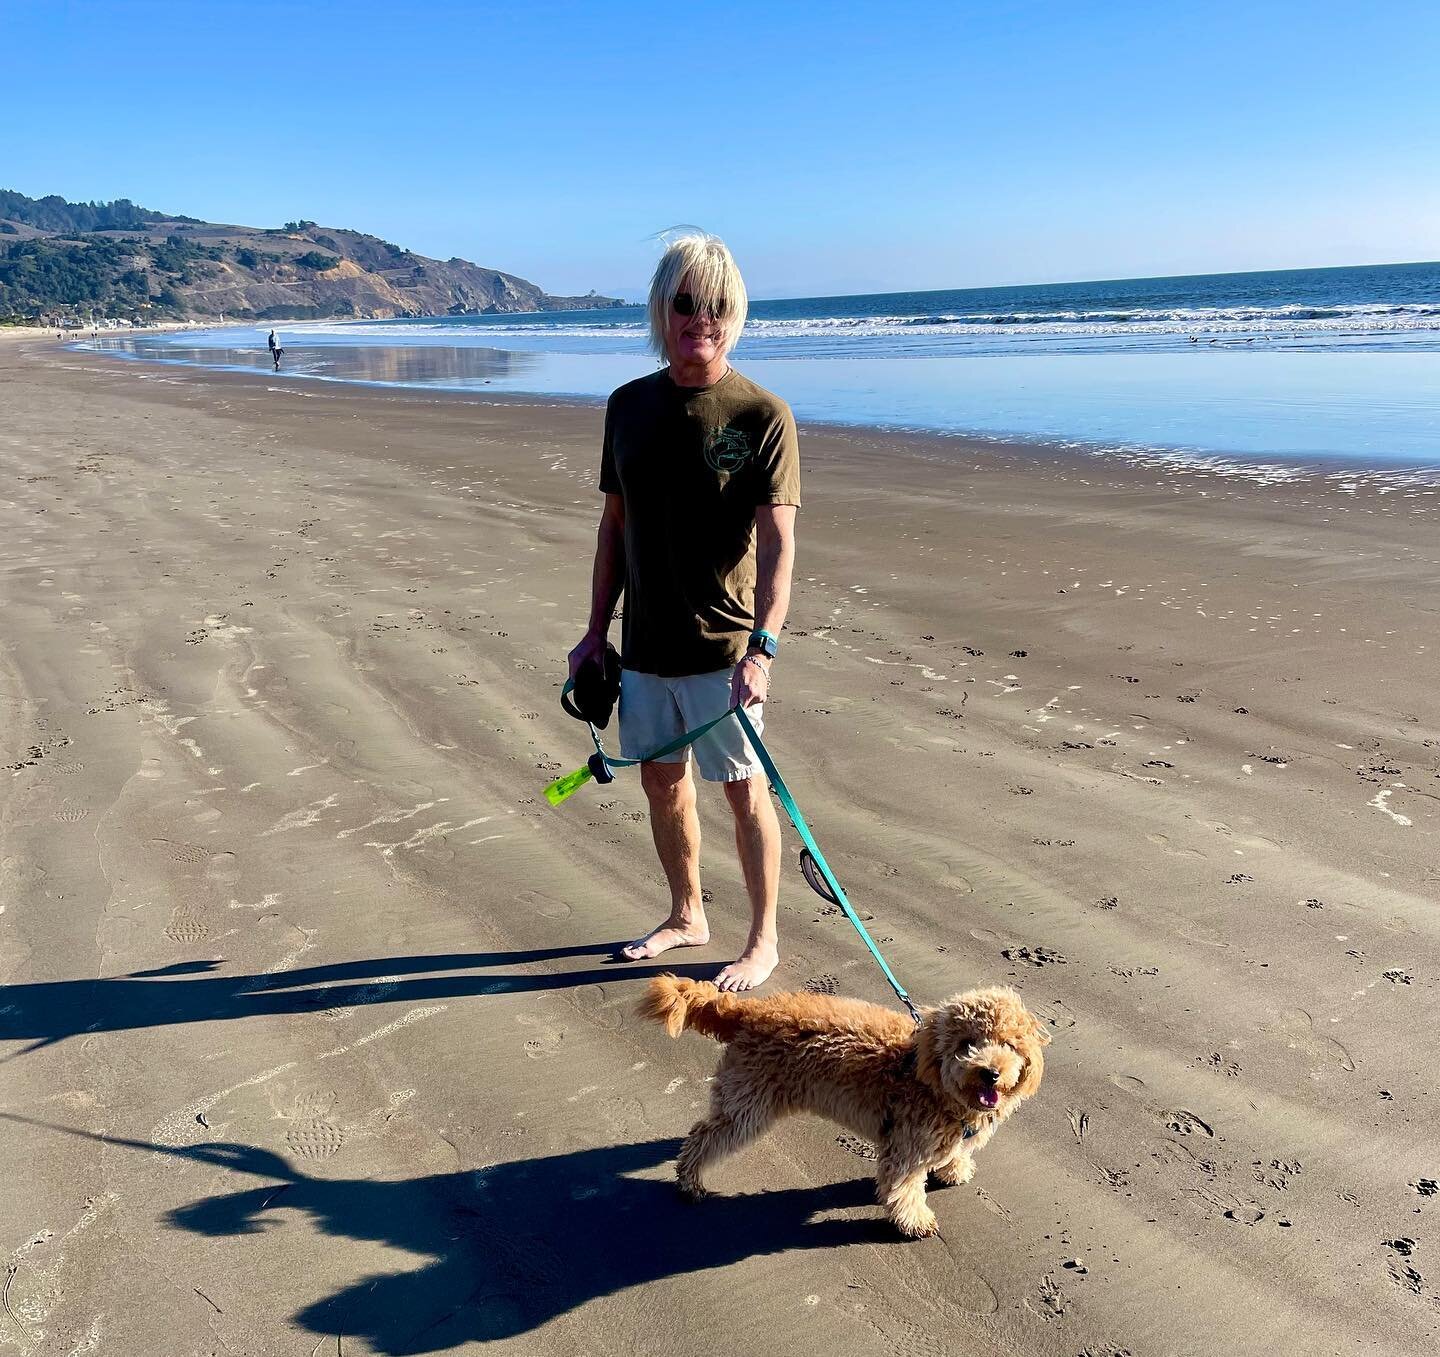 Thanksgiving outing to Stinson Beach on a gorgeous blue-sky Northern California day. Beach boy Bo was stoked to take a 4-mile stroll along the ocean. Thankful for this Golden State. #thanksgiving #stinsonbeach #california #beach #havapoo #ocean